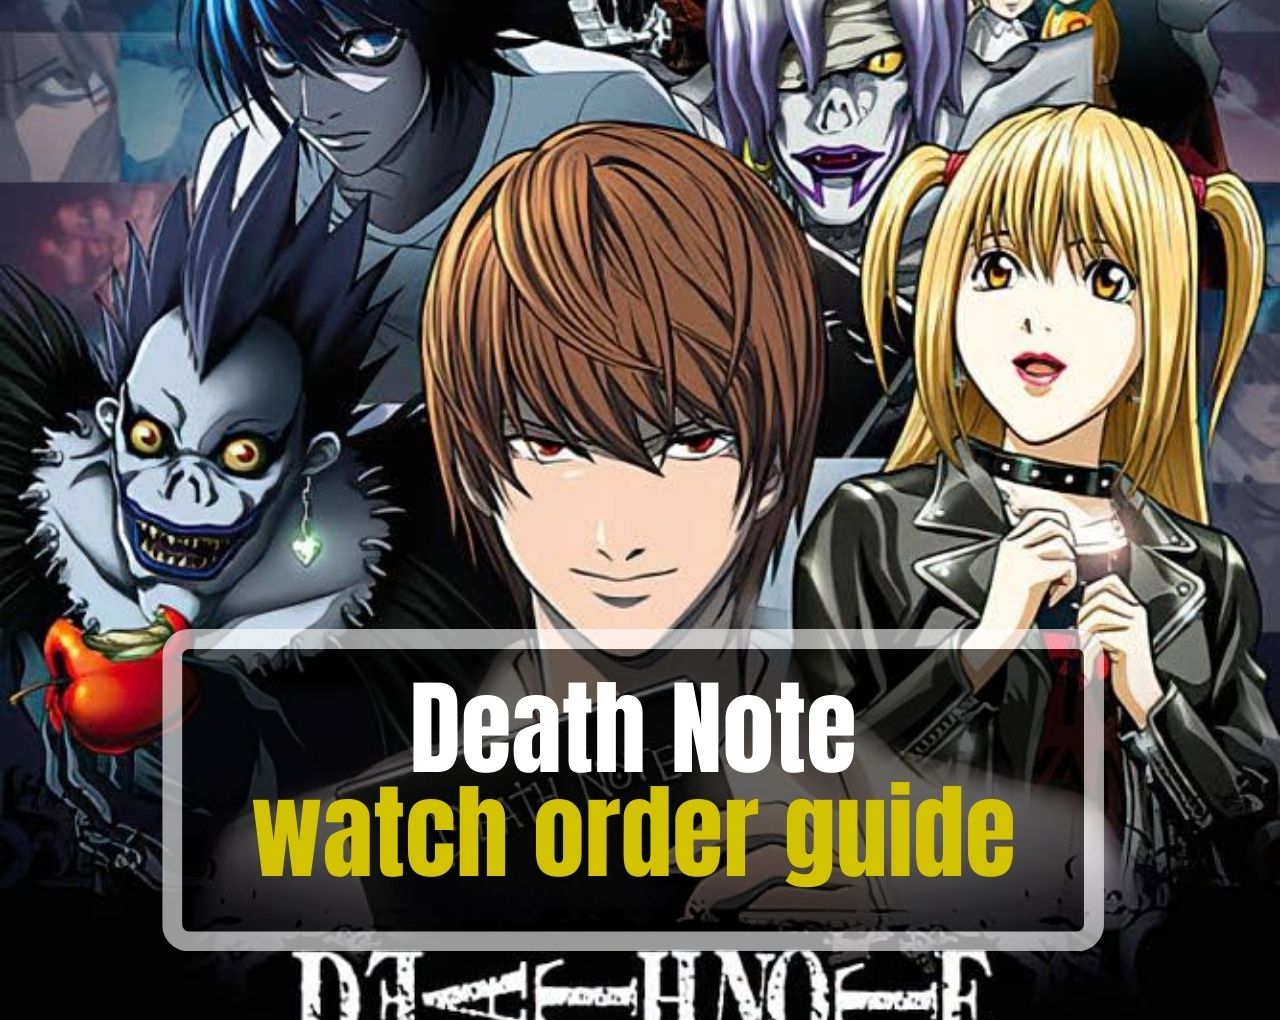 Death Note watch order guide